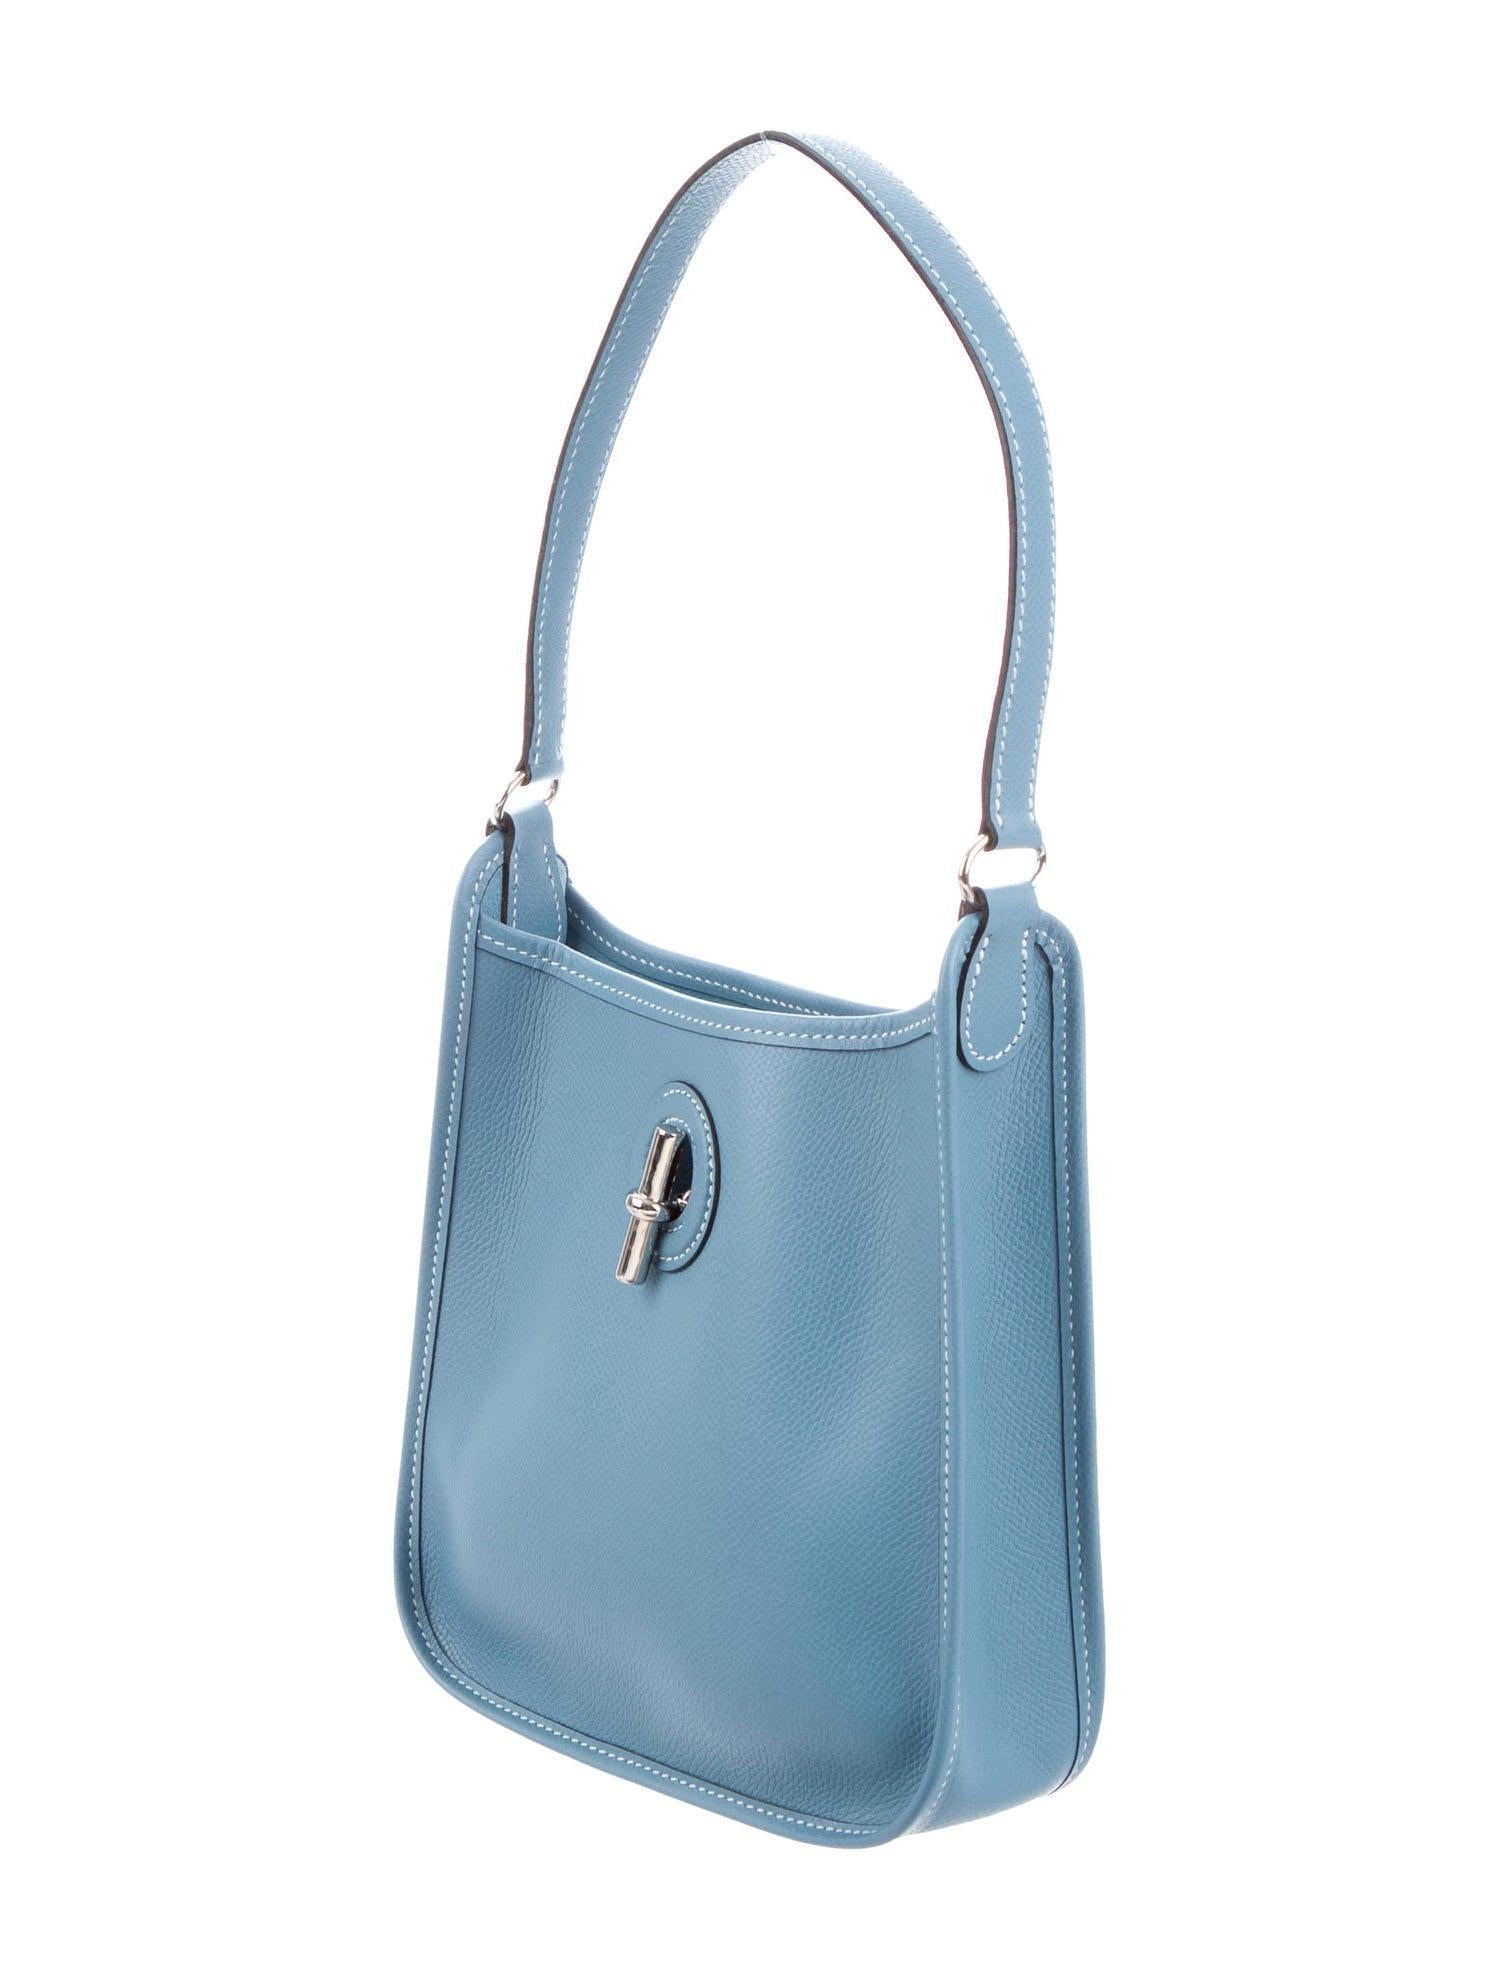 Hermes Tiffany Baby Blue Leather Palladium Toggle Top Handle Satchel Small Mini Shoulder Bag

Leather 
Palladium-plated hardware
Suede lining 
Toggle closure 
Made in France
Measures 7